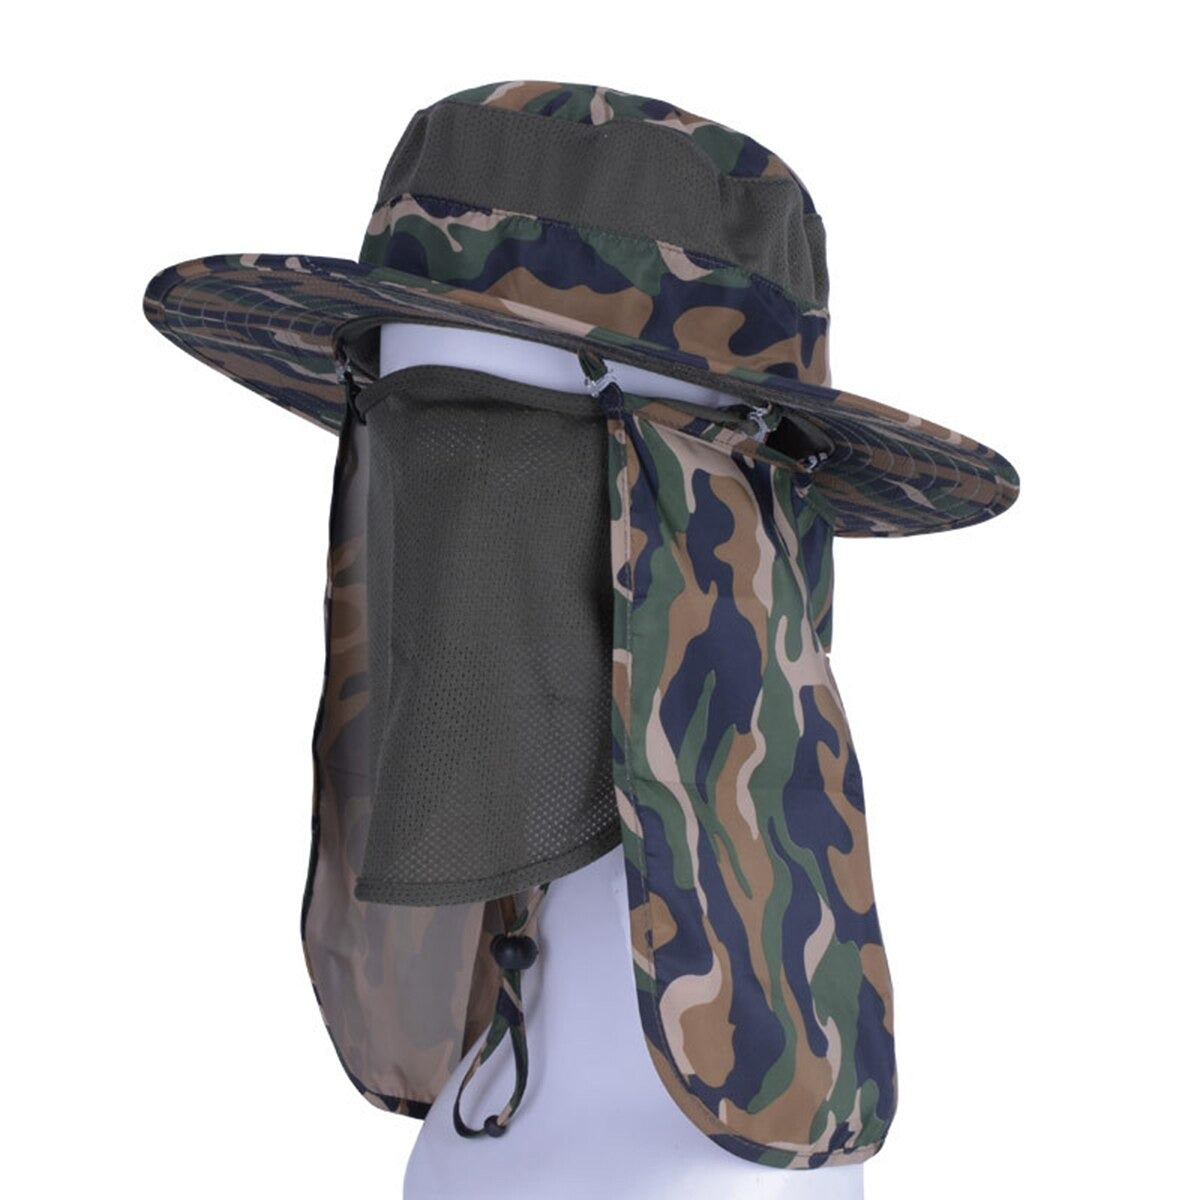 Durable Lightweight Fishing Hat with Face Protecting Cover